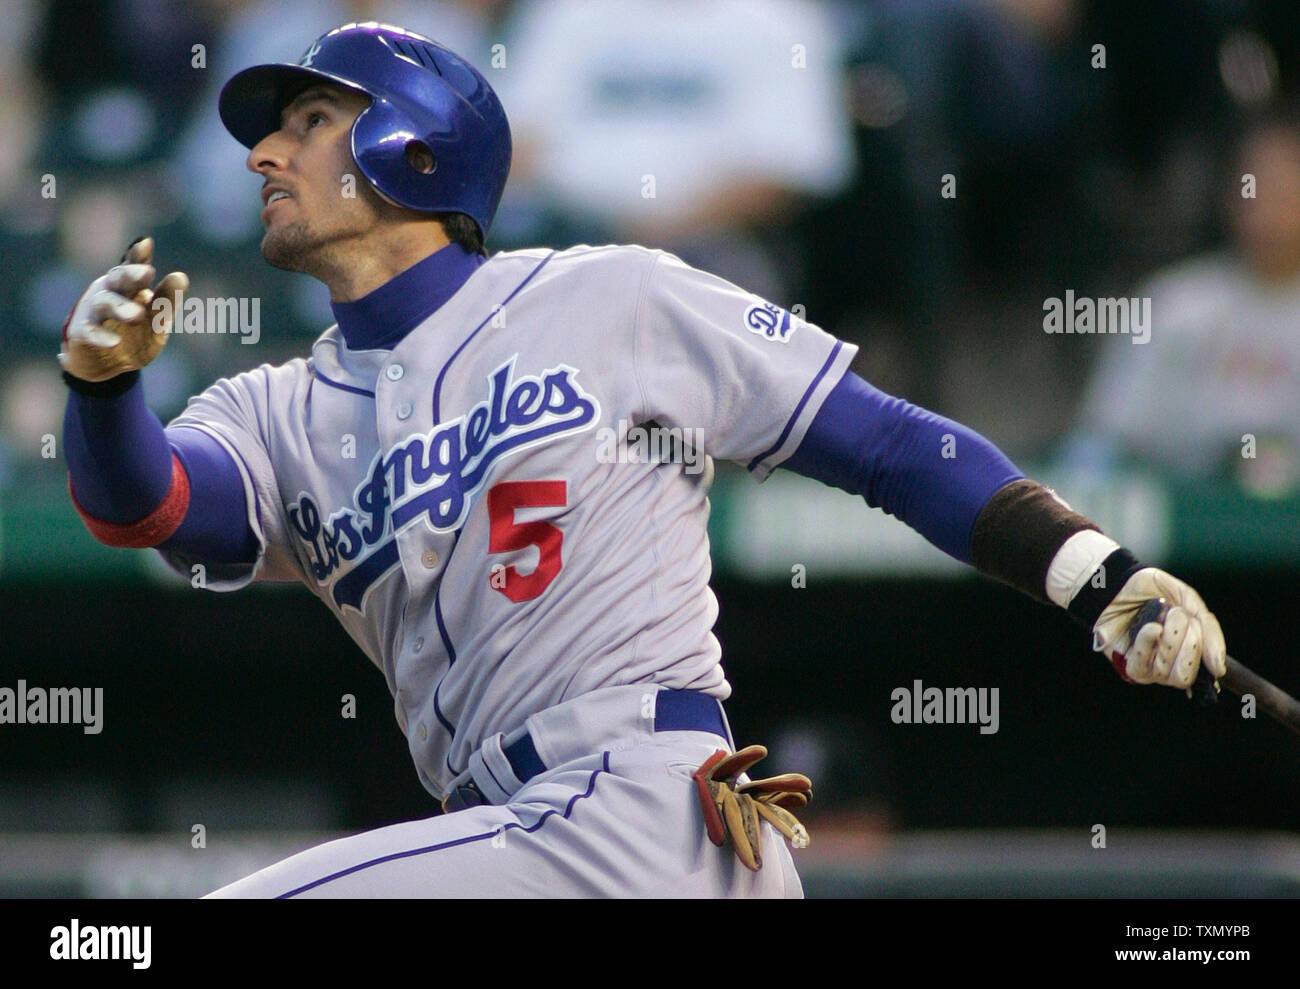 Los Angeles Dodgers Nomar Garciaparra singles in the first inning